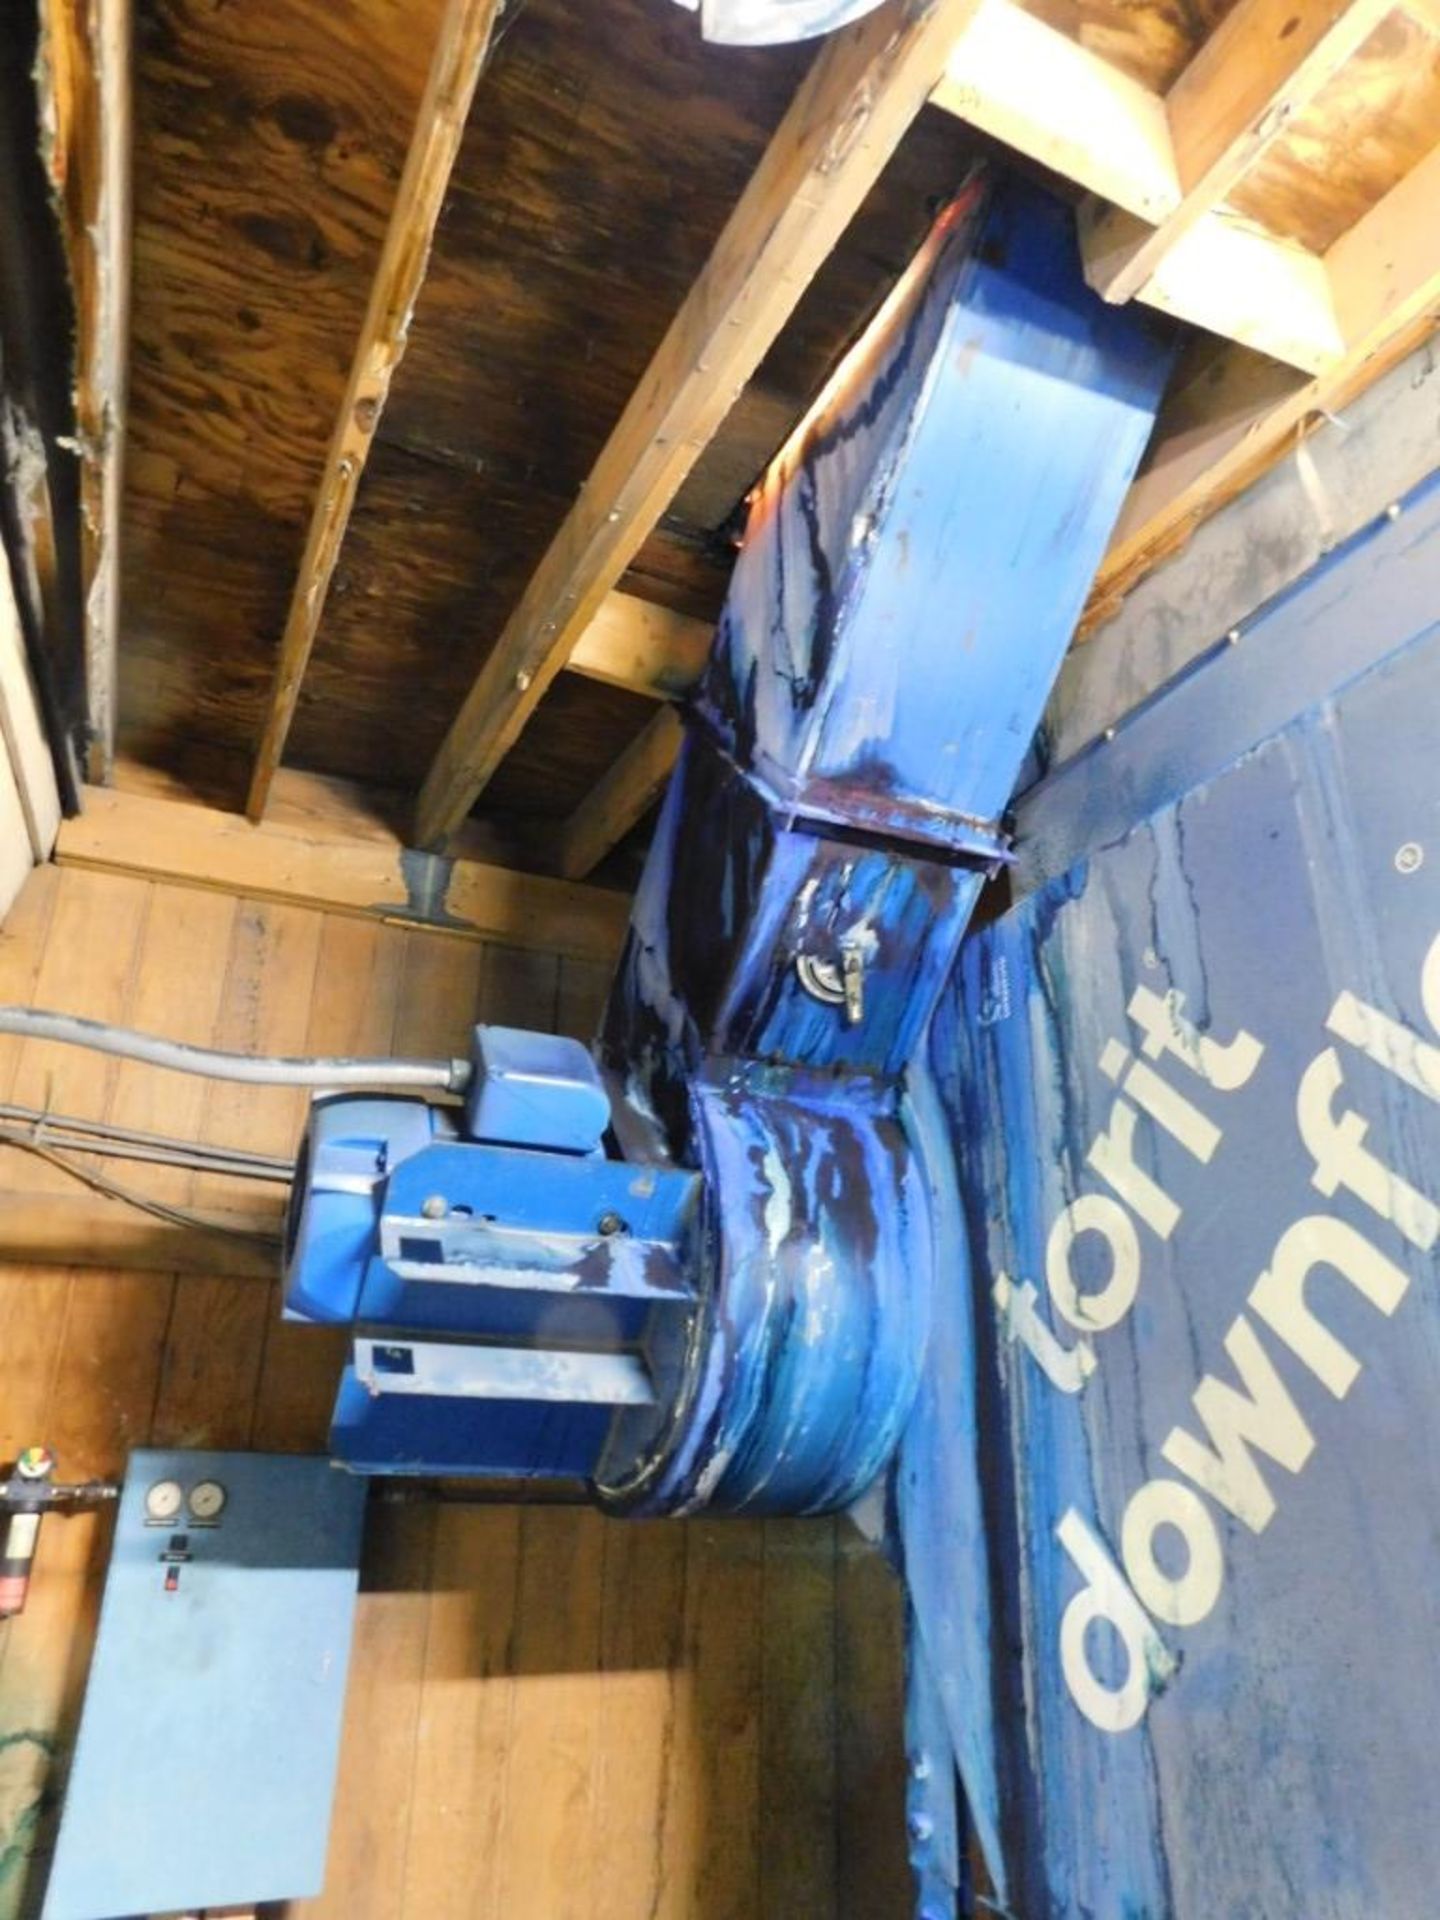 Torit Donaldson Model DFT2-16, Eight Cartridge Down Flo Dust Collector, s/n IG356960-001, 30 HP - Image 3 of 6